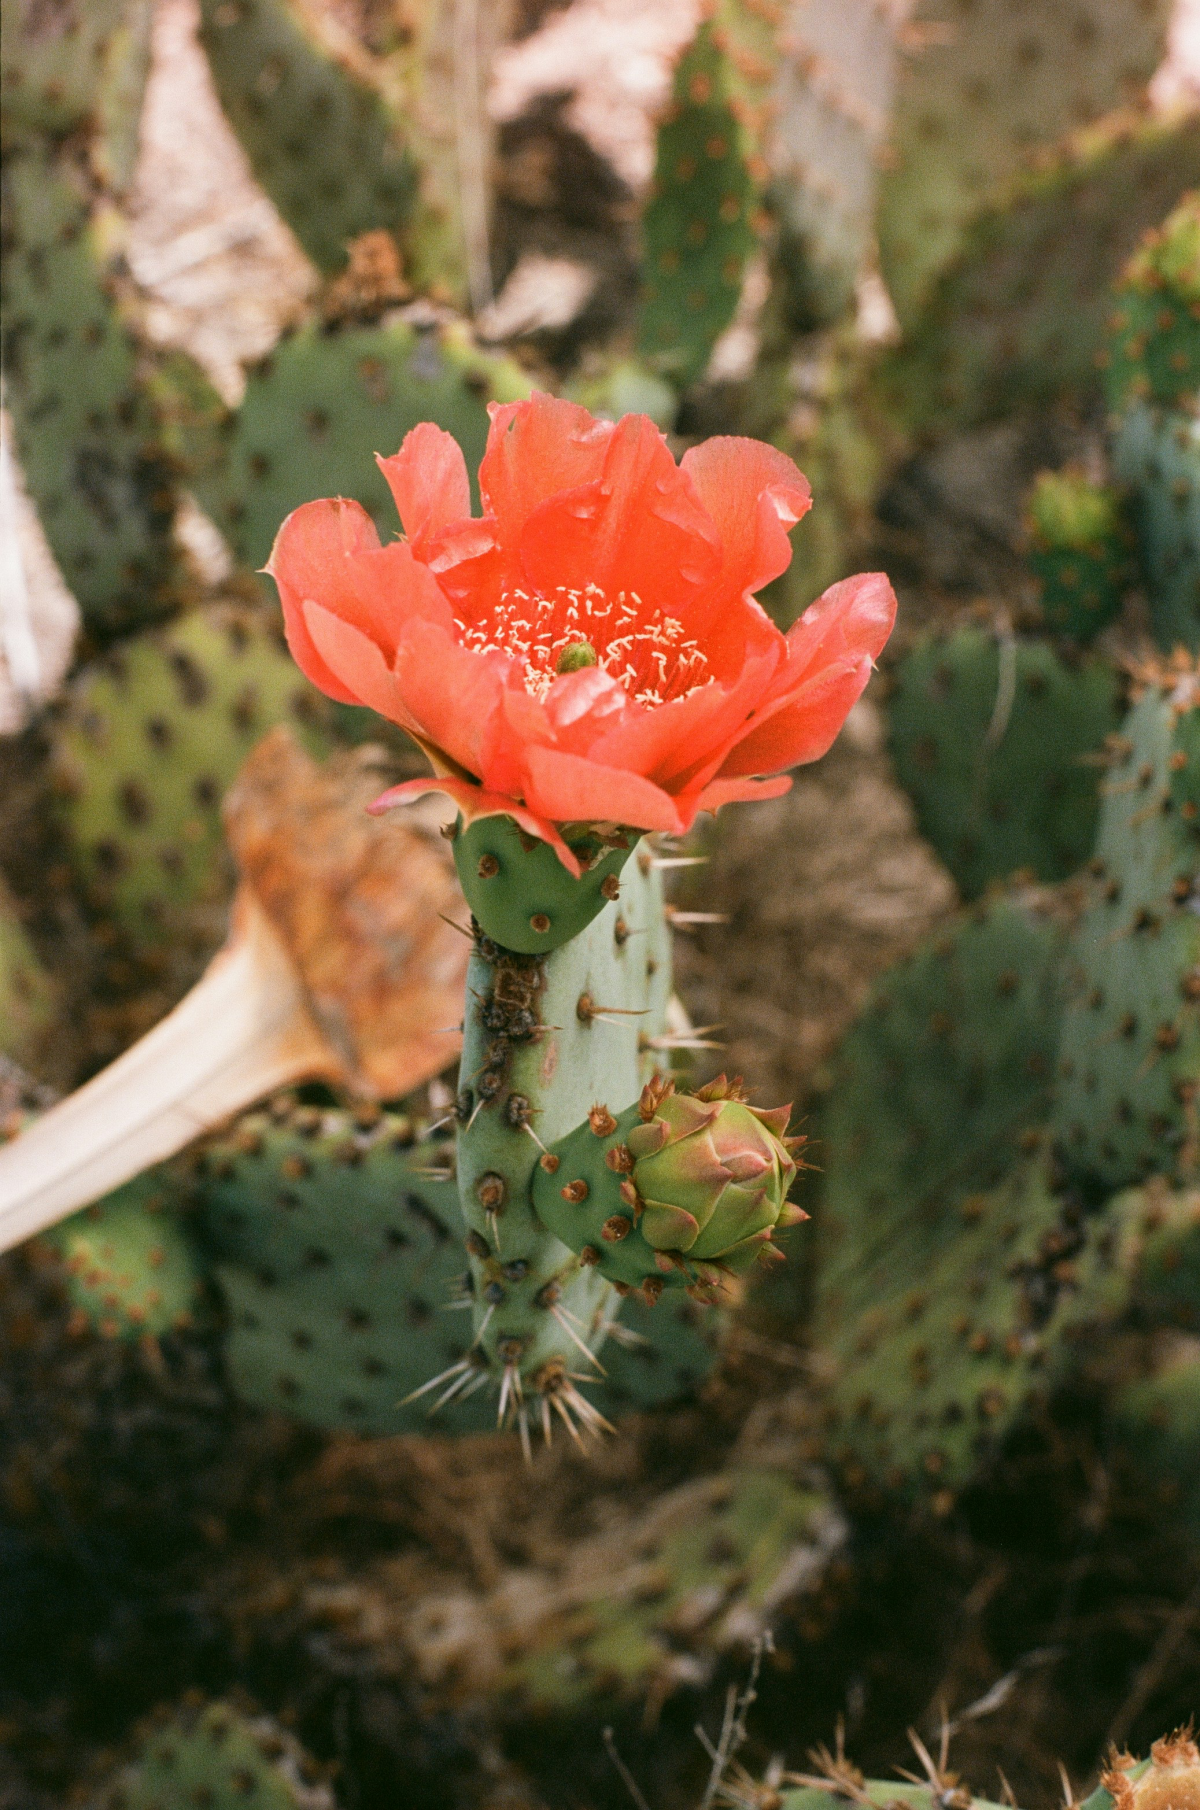 cactus with a pink flower